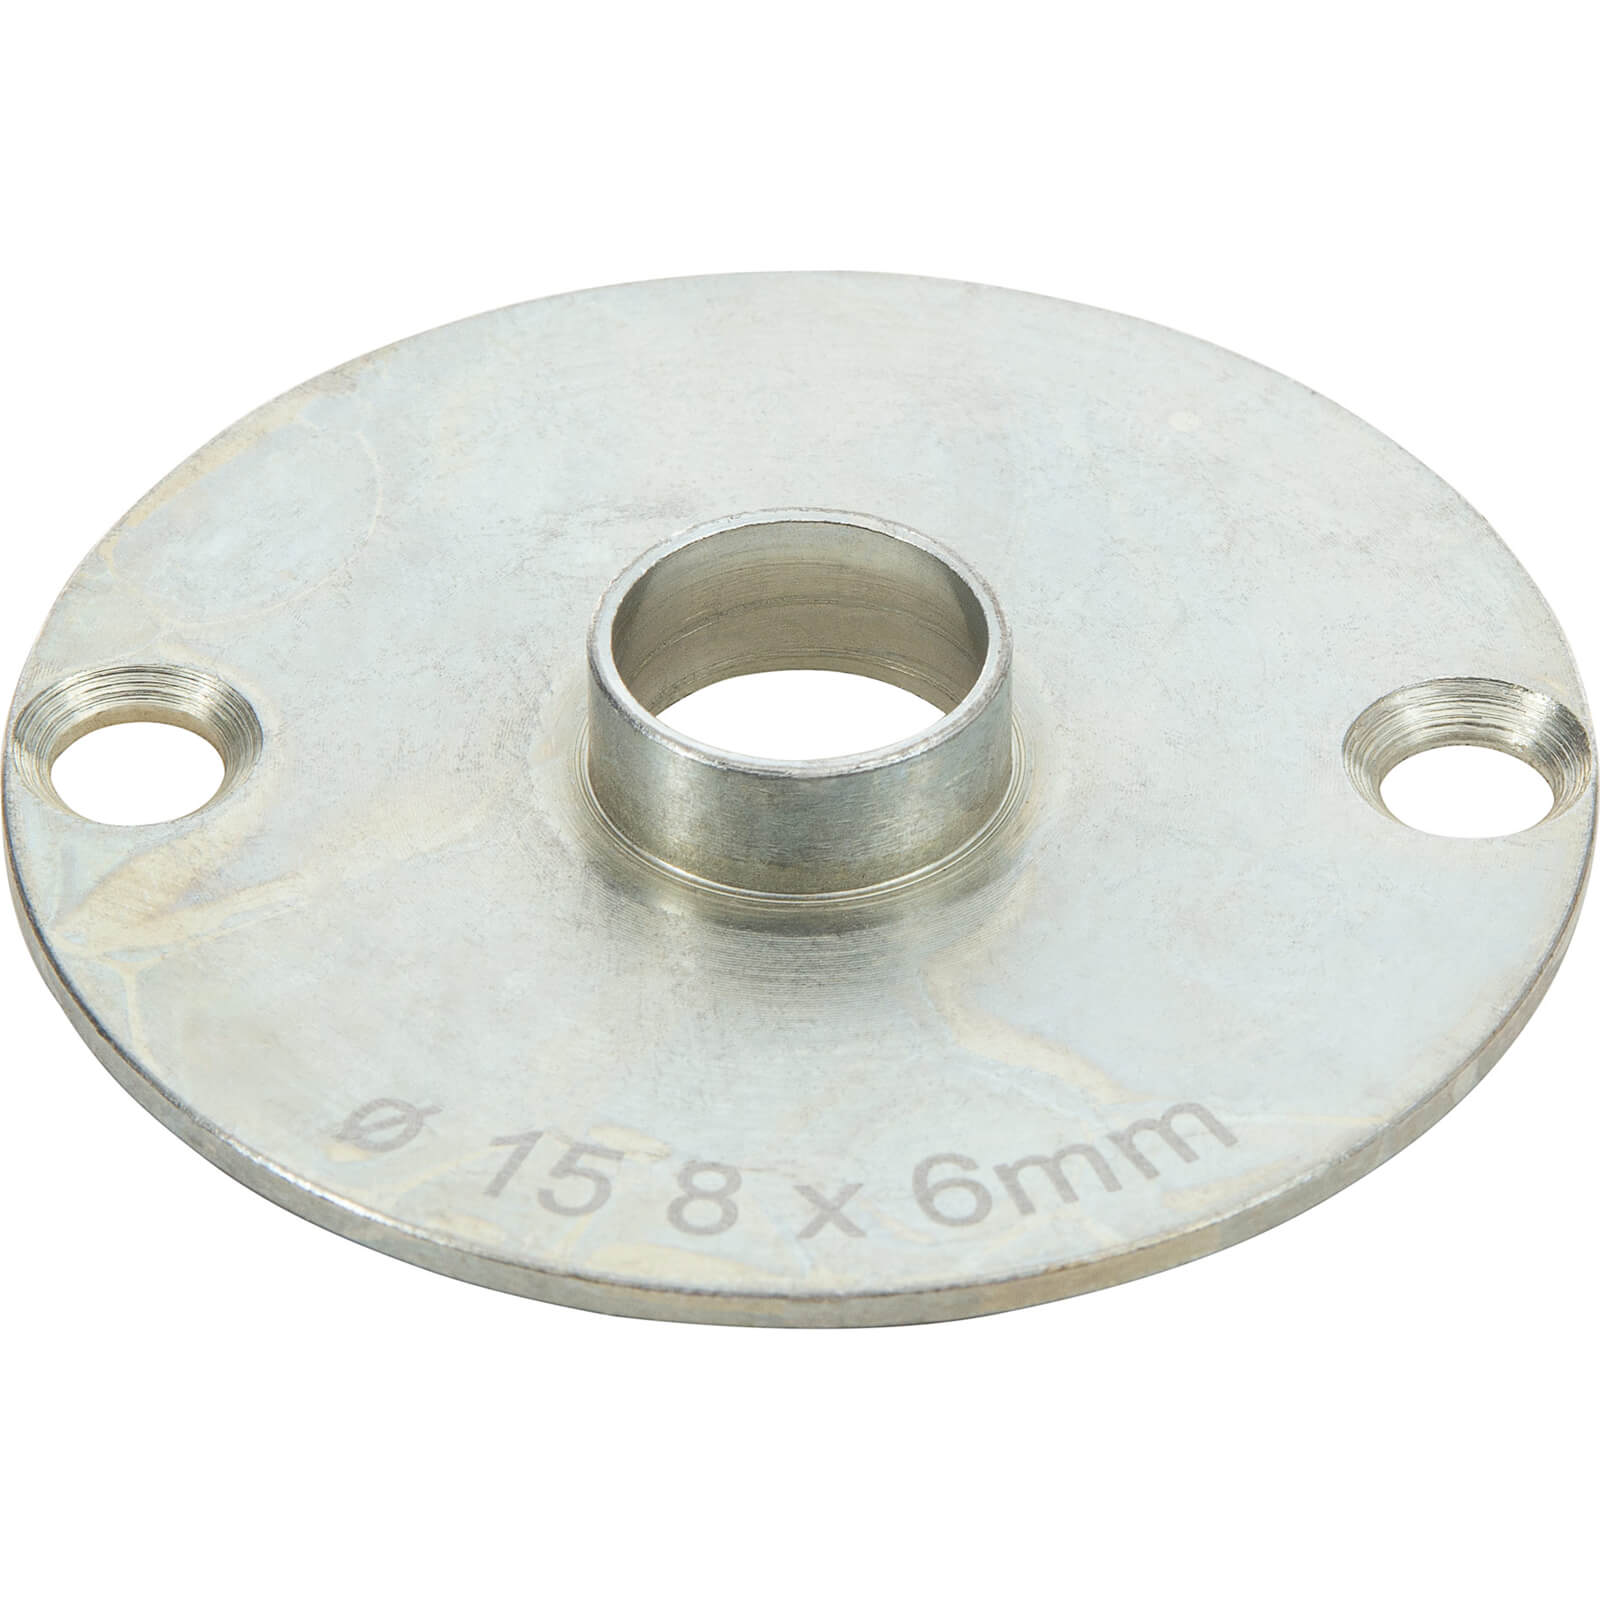 Image of Trend Universal Router Guide Bush 15.8mm